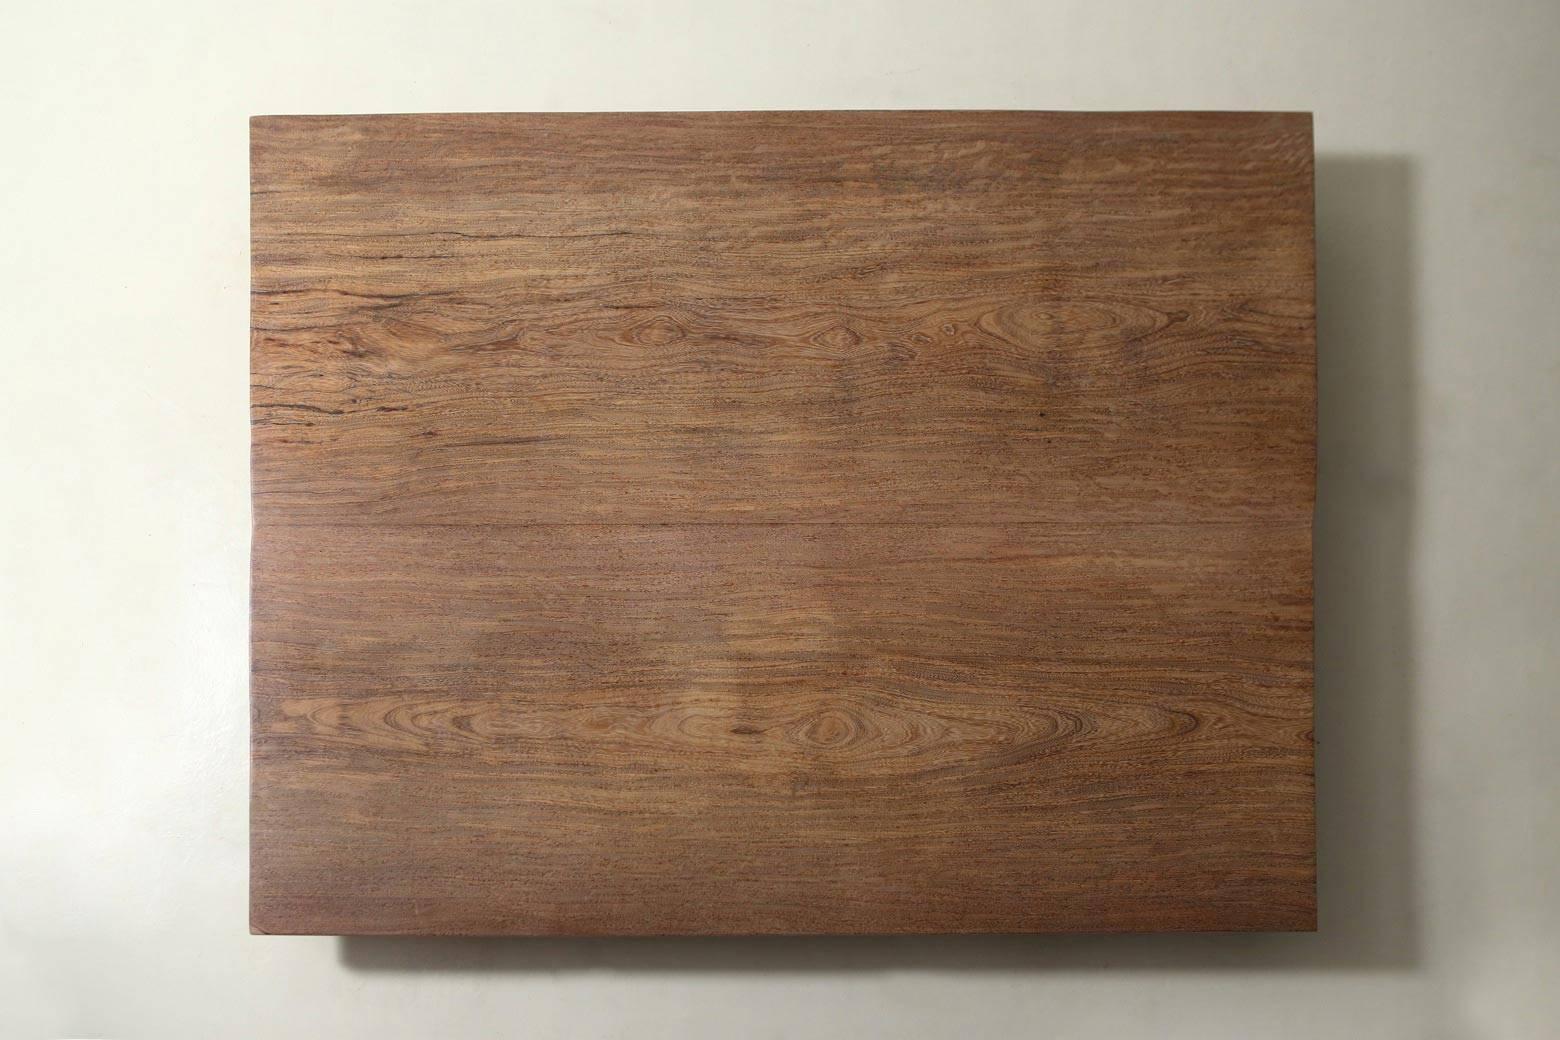 Minimalist Bespoke Coffee Table, Two Rare Slabs of Antique Hardwood by P. Tendercool For Sale